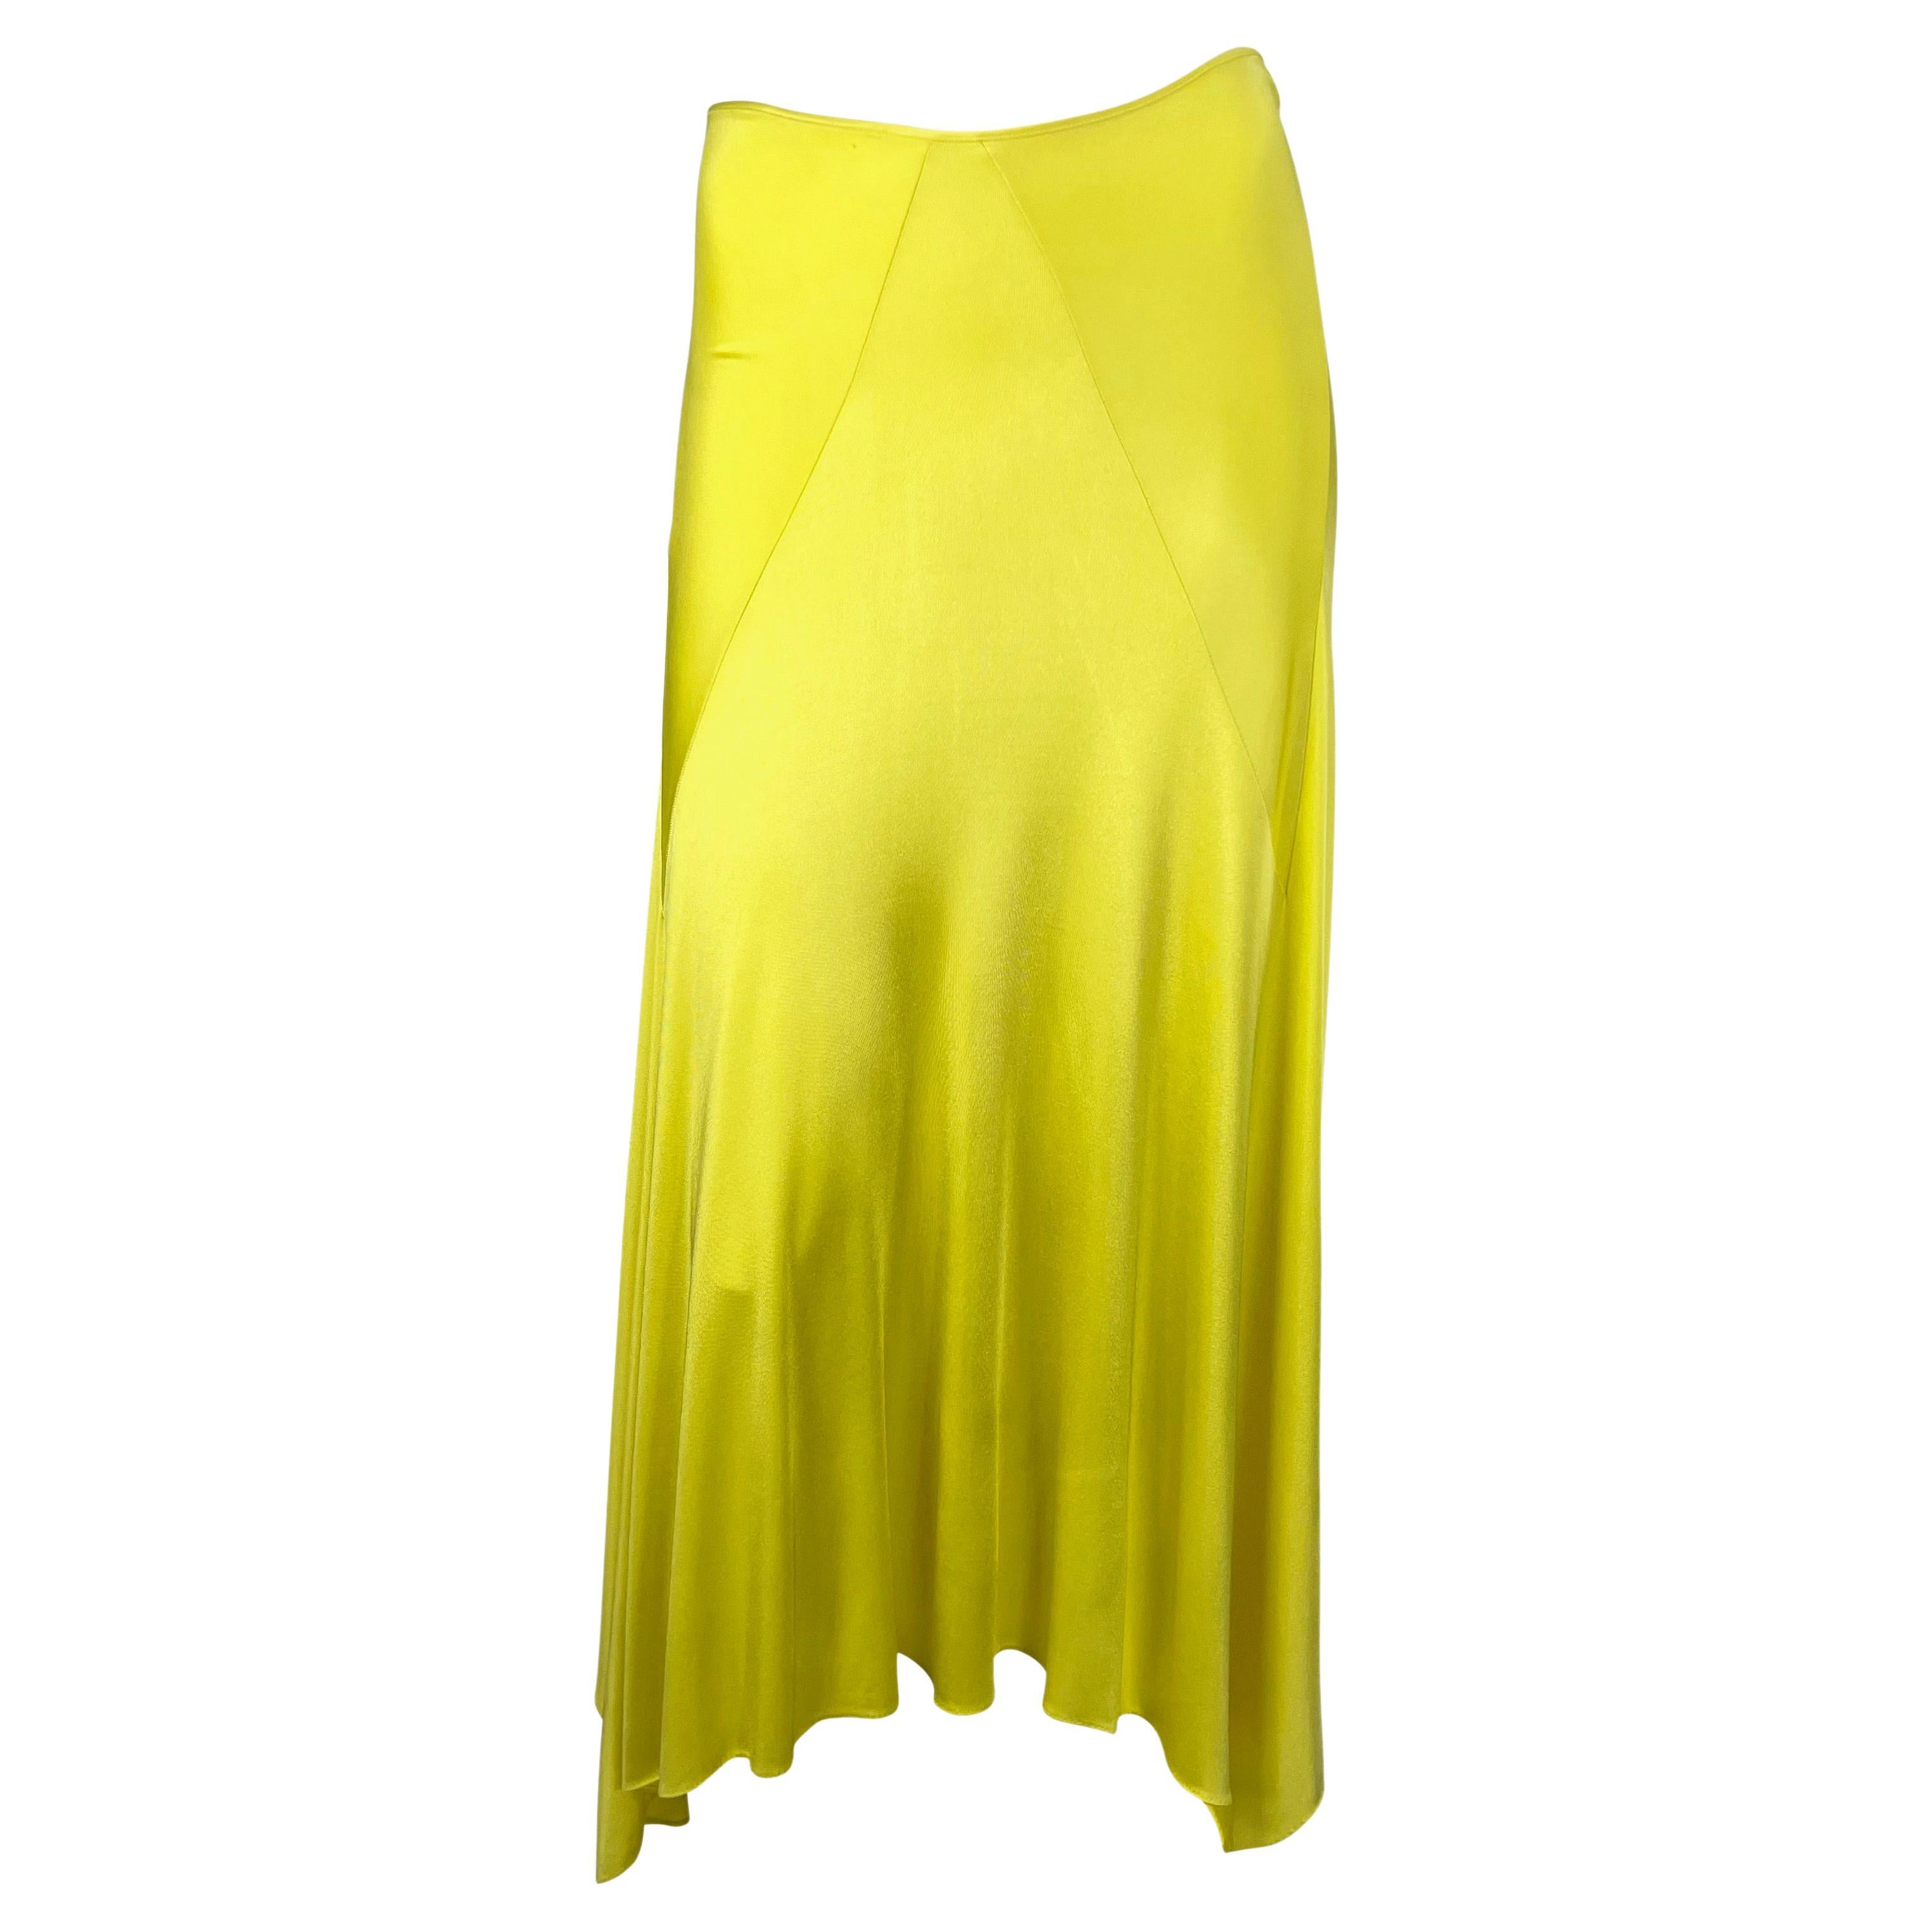 S/S 2004 Yves Saint Laurent by Tom Ford Canary Yellow Stretch Maxi Skirt For Sale